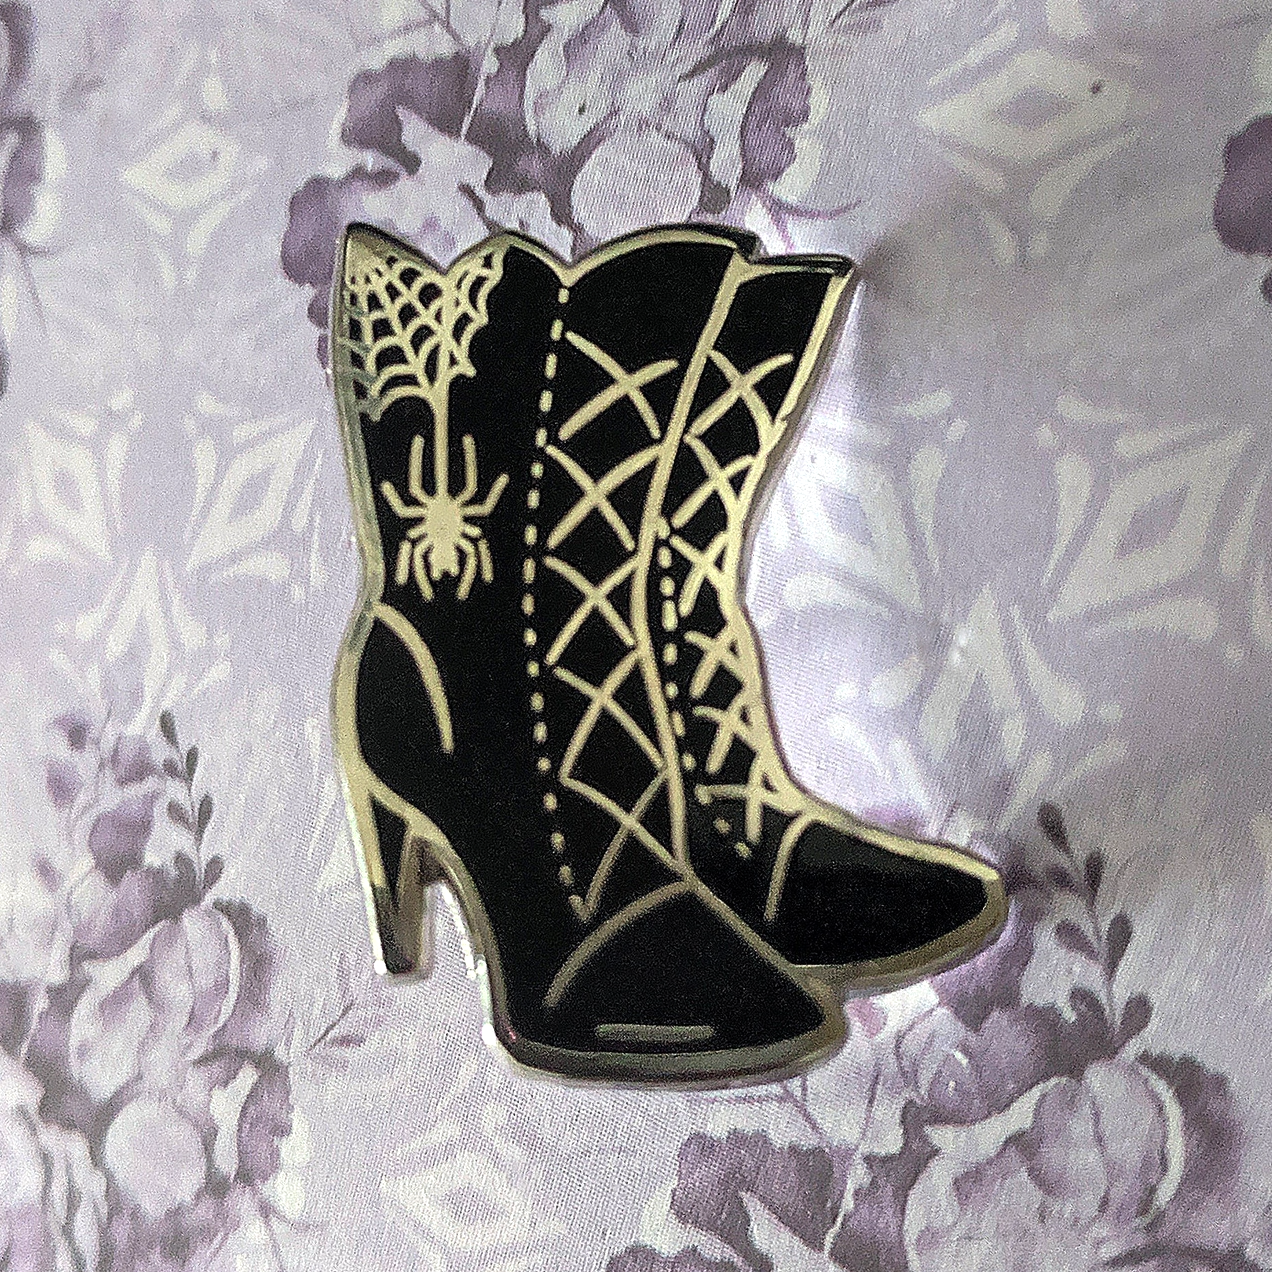 THE PICKETY WITCH BOOTS ENAMEL PIN